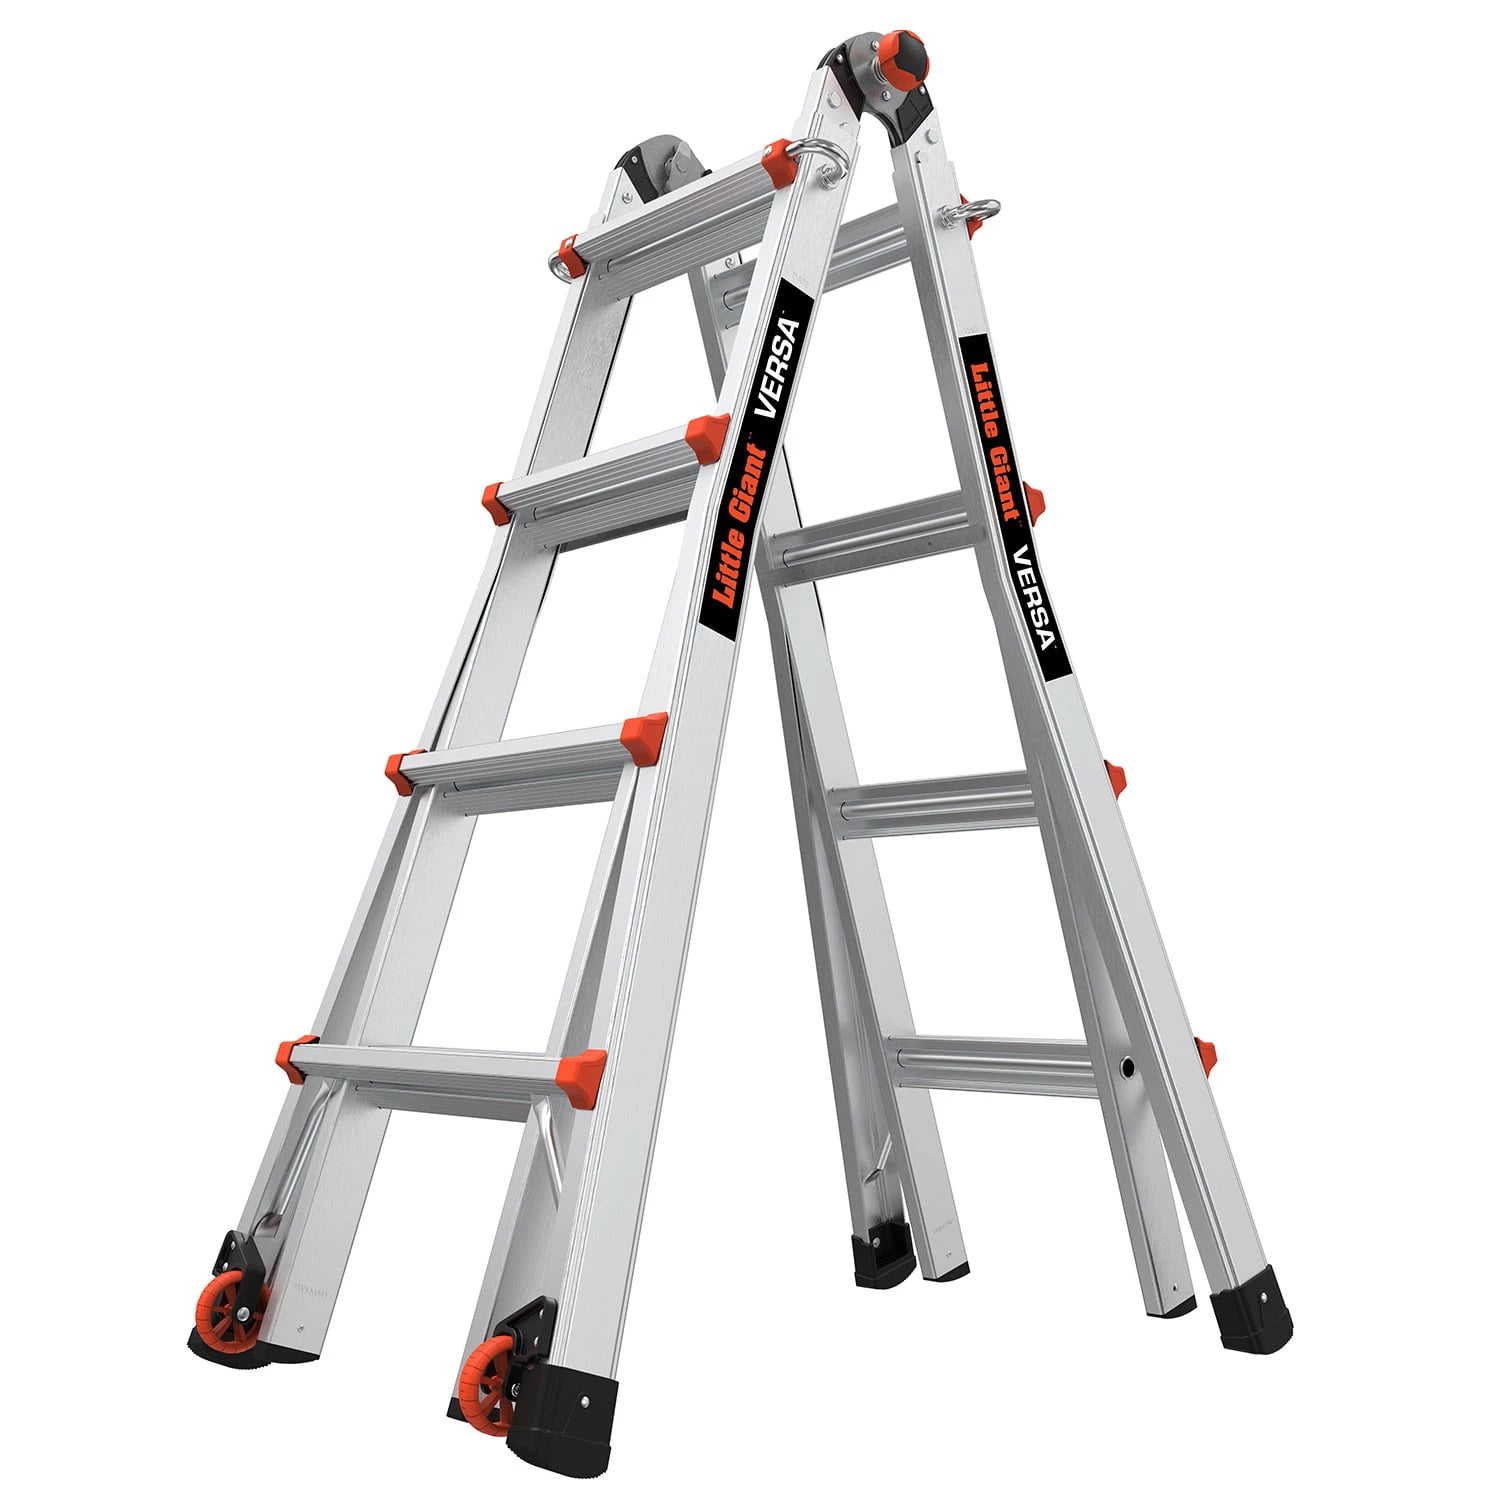 Details about   Little Giant 13-Foot Velocity Multi-Use Ladder 300lbs Duty Rating 15413-001 p0p 